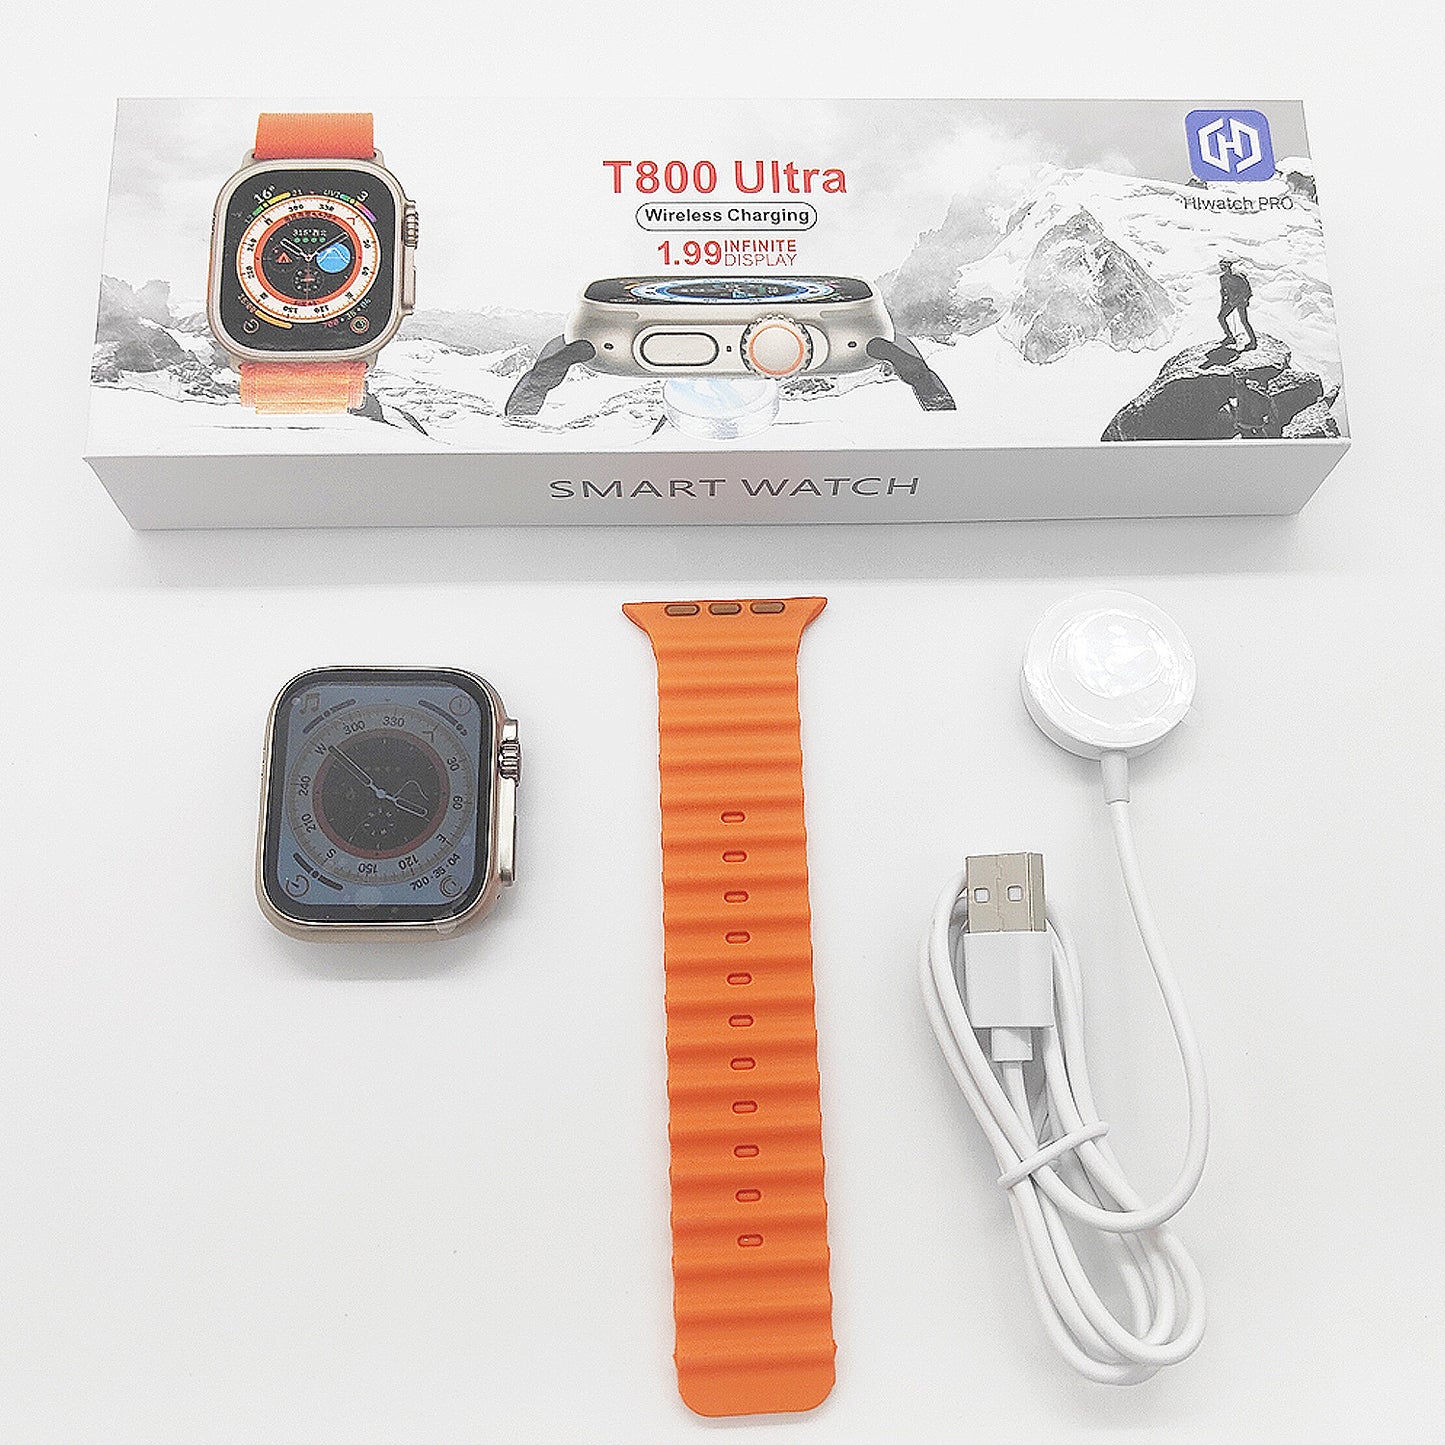 T800 Ultra Smartwatch: 1.99" Display, Bluetooth Calls, Fitness Tracker, Compatible with iPhone & Android